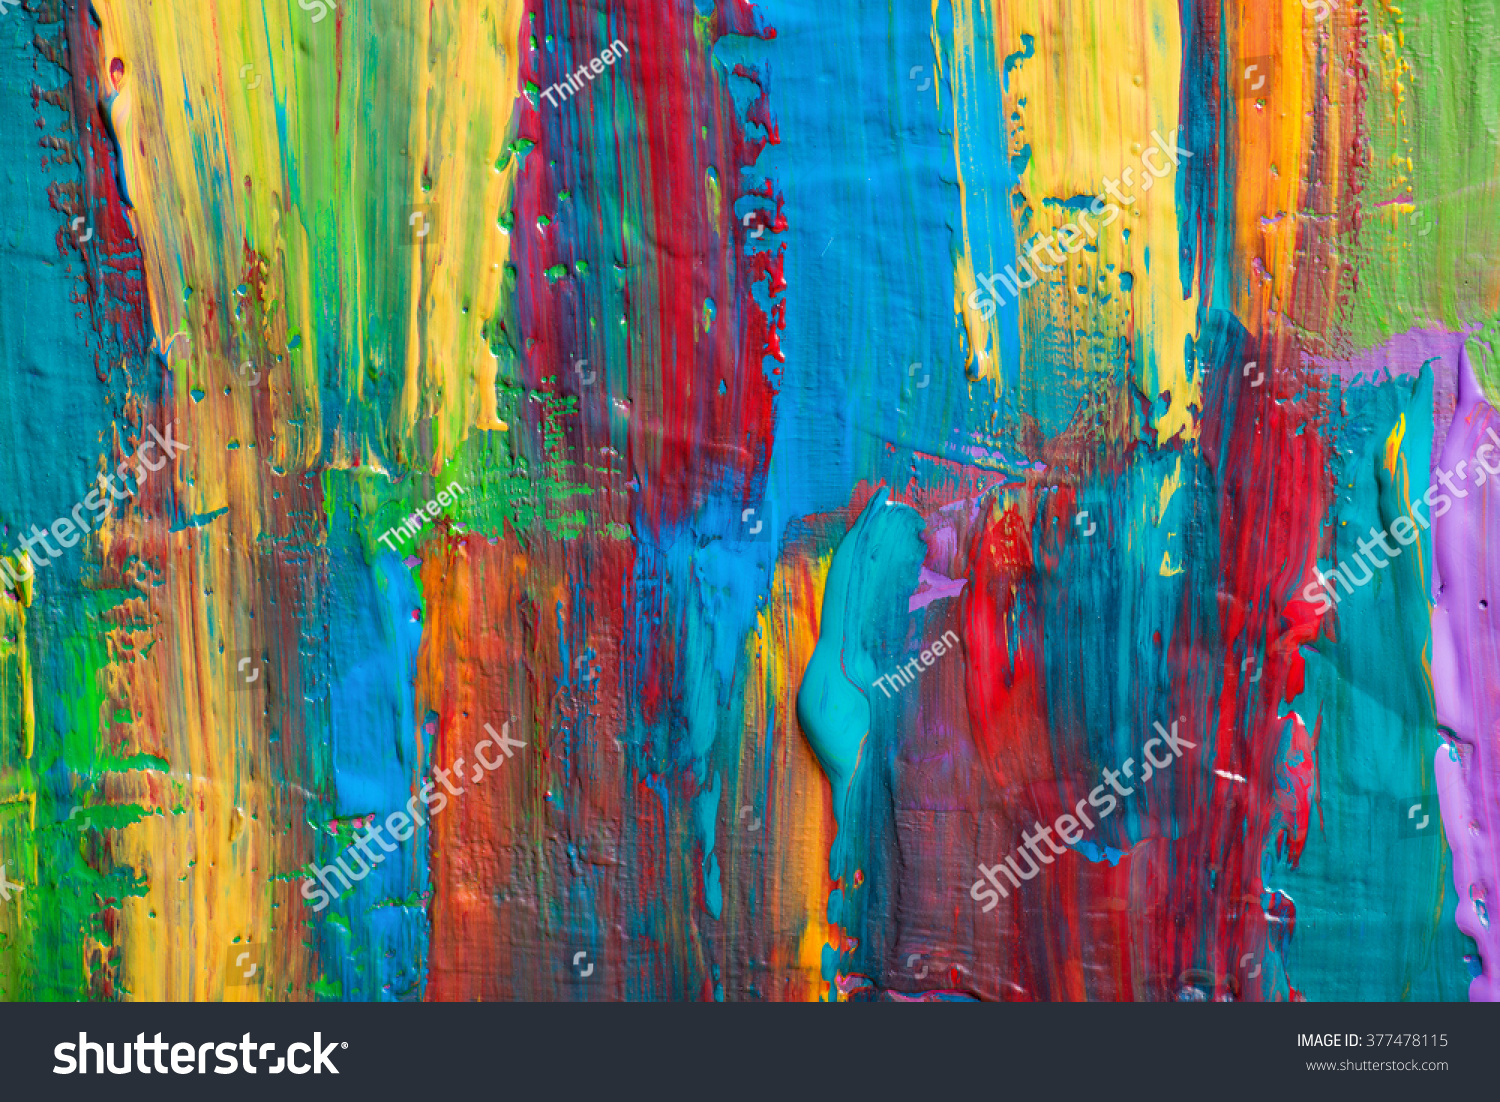 Abstract art background. Hand-painted background. SELF MADE. #377478115